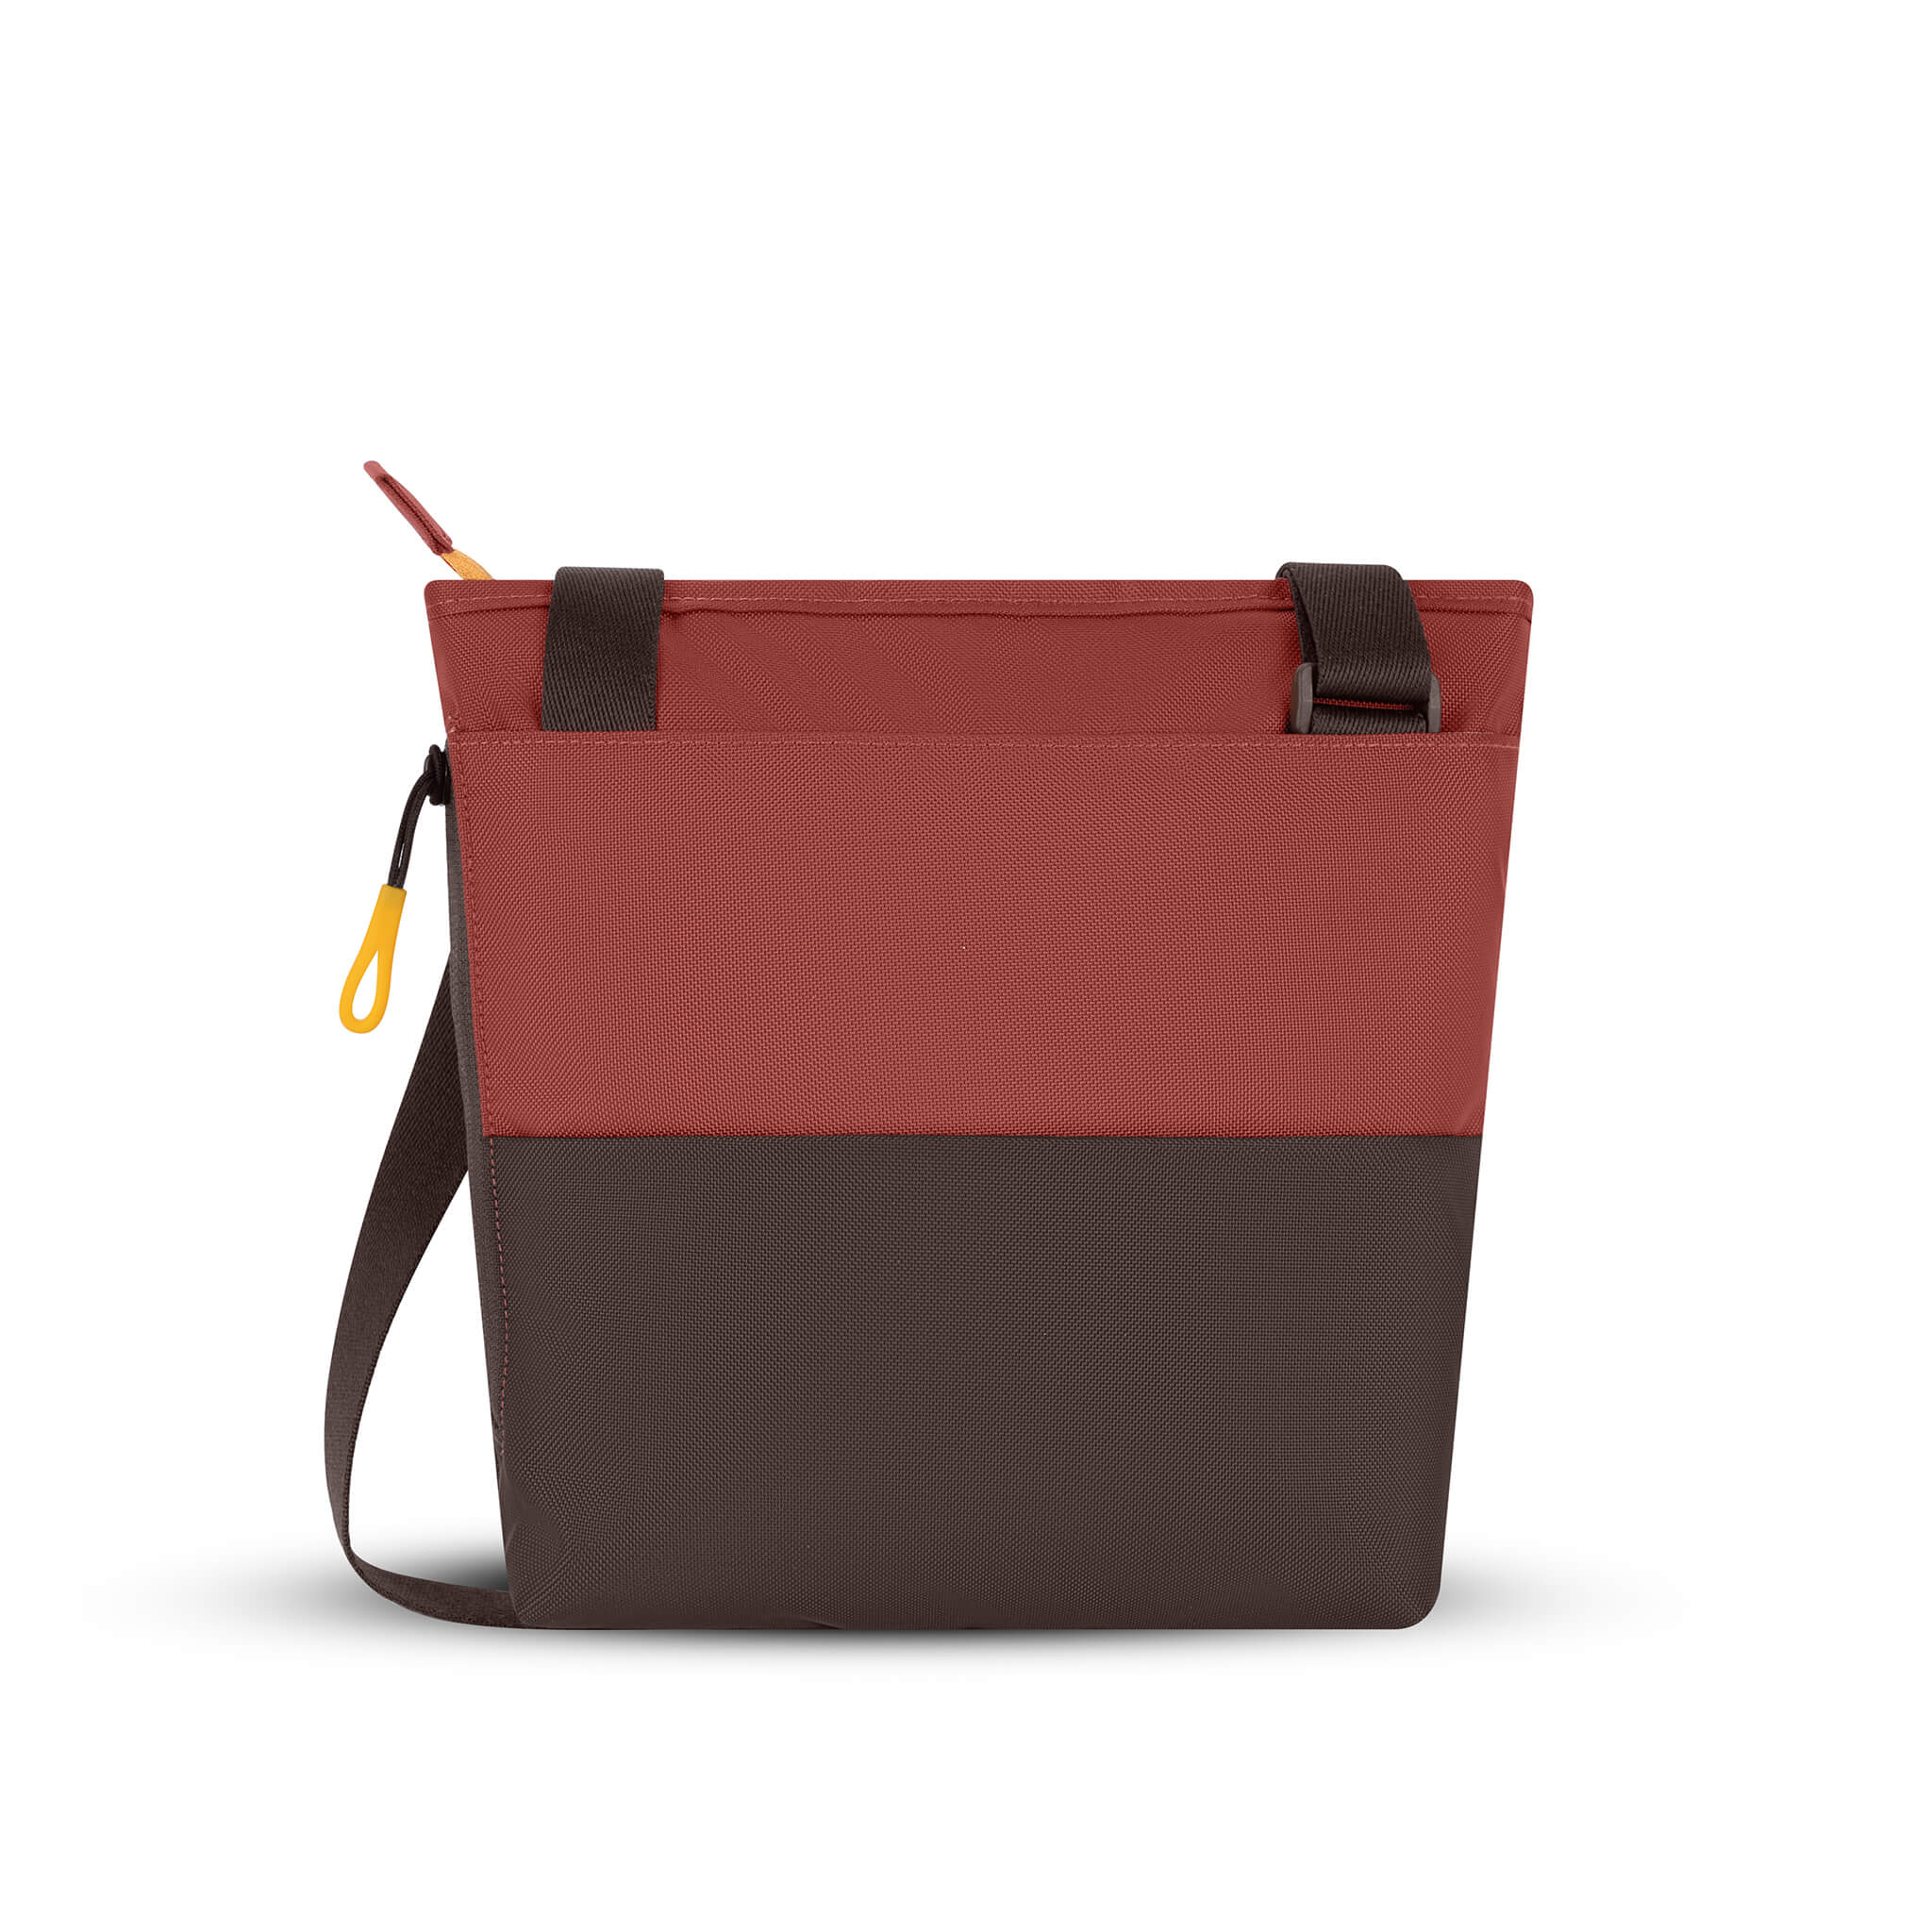 Back view of Sherpani crossbody travel bag, the Sadie in Cider. Sadie features include two front zipper pockets, a discrete side pocket, detachable keychain, adjustable crossbody strap, back slip pocket and RFID blocking technology. The Cider color is two-toned in burgundy and dark brown with yellow accents.